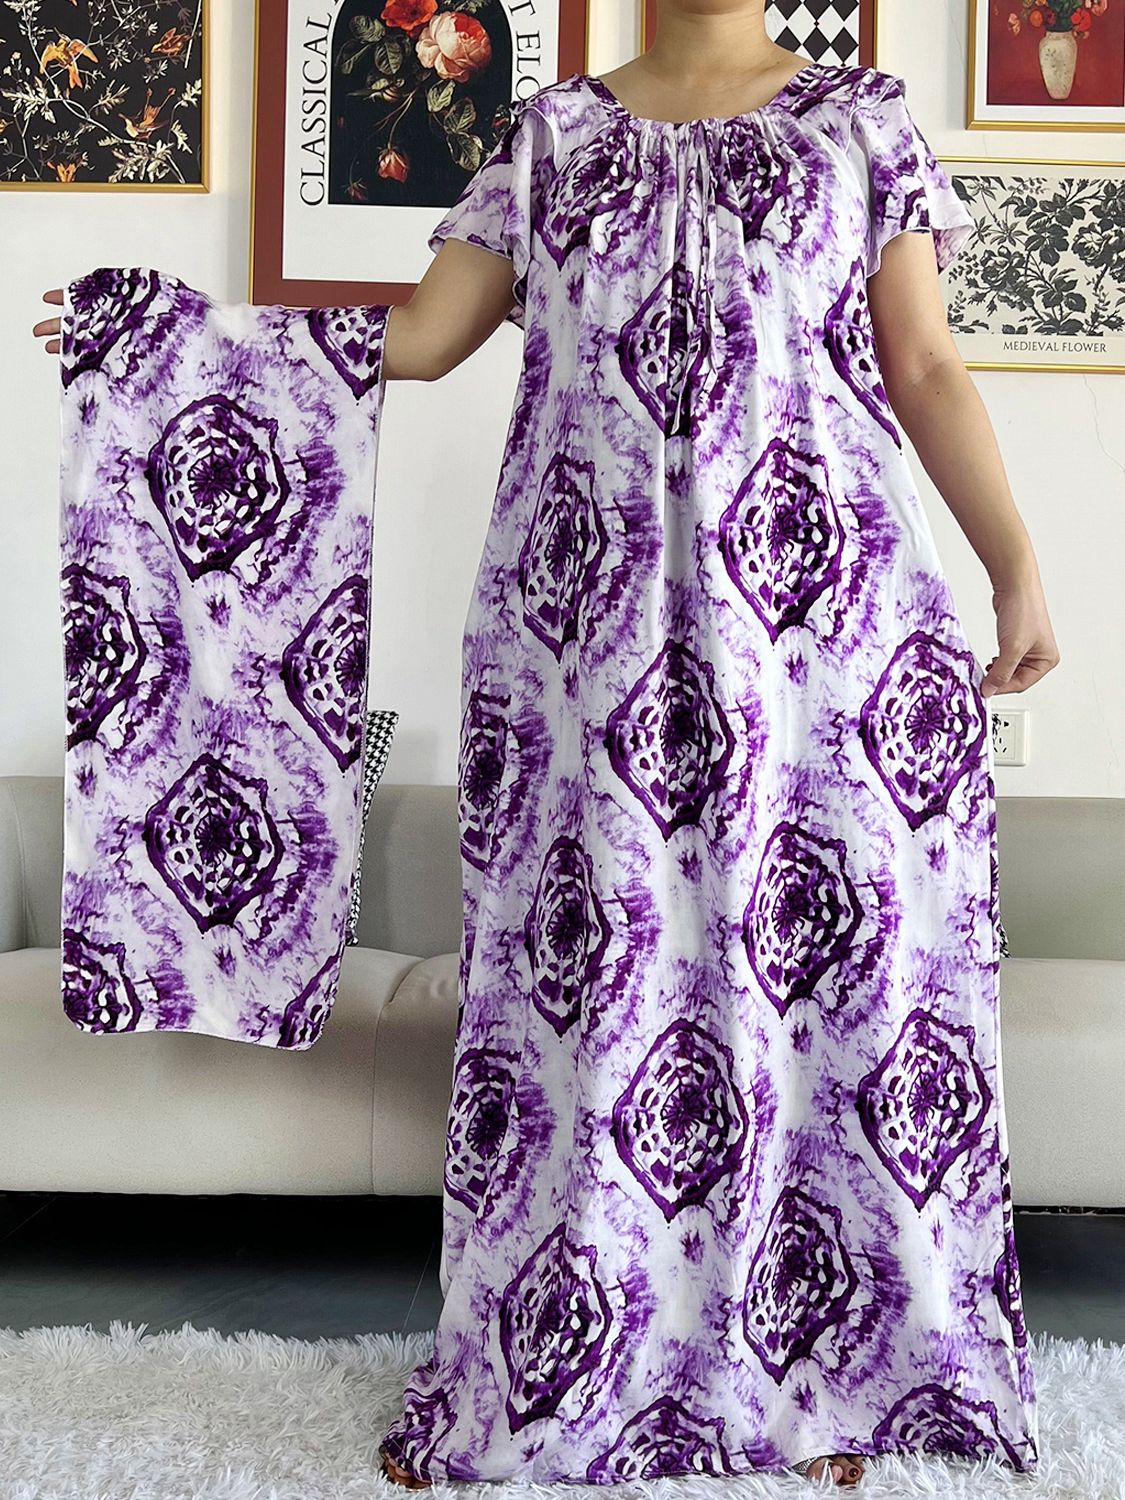 Ethnic Chic: African Inspired Tie-Dye Abaya Dress with Floral Prints and Loose Fit - Perfect for Summer - Flexi Africa - Flexi Africa offers Free Delivery Worldwide - Vibrant African traditional clothing showcasing bold prints and intricate designs